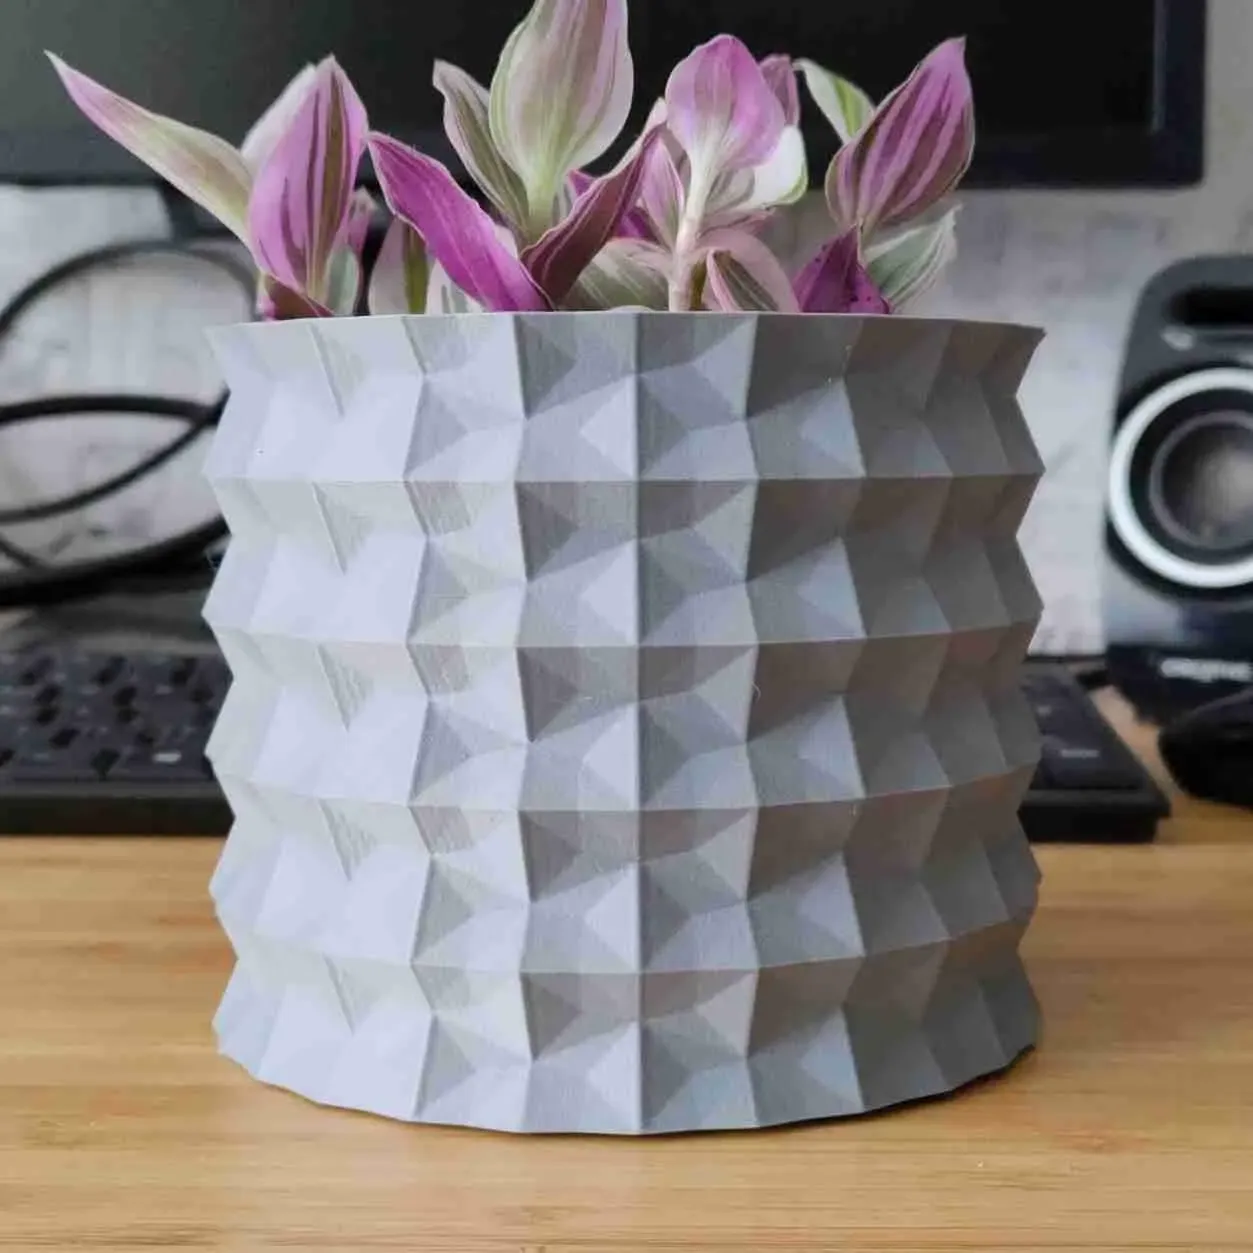 Tradicional Origami flower Pot and Planter for your plants